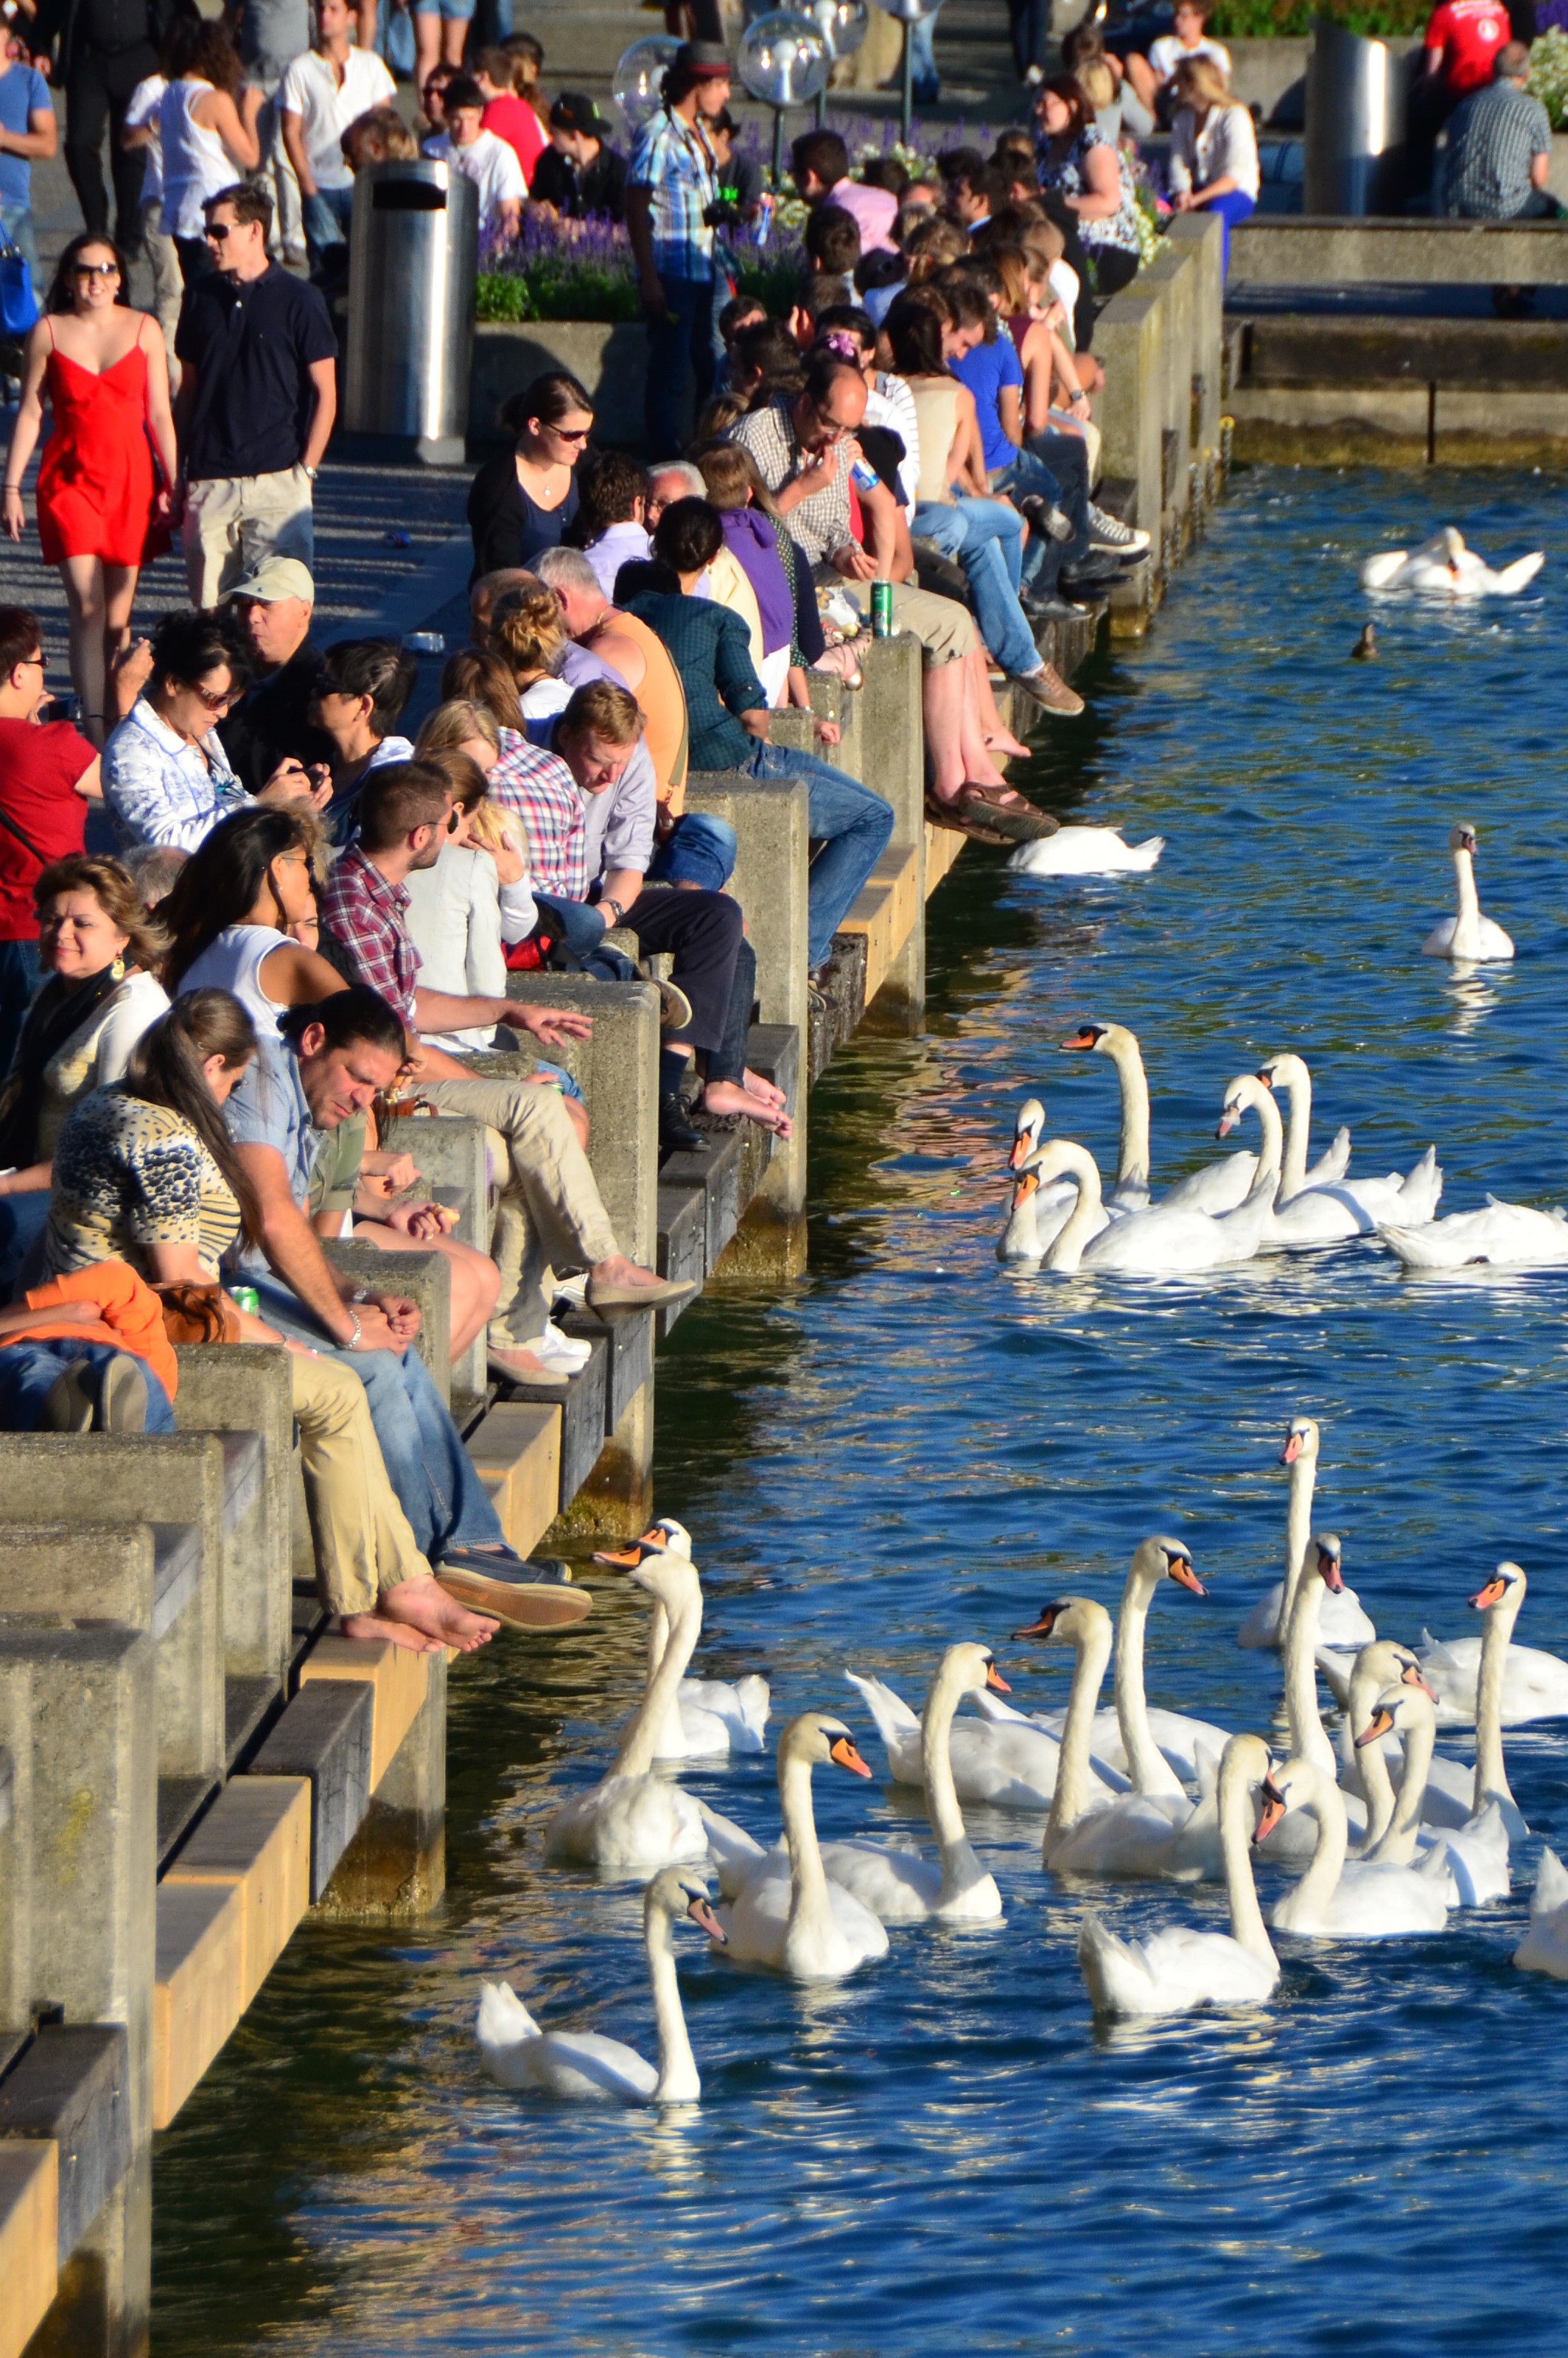 Swans at Lake Zurich1 e1356963721873 2012 in Review    and a 2013 Preview